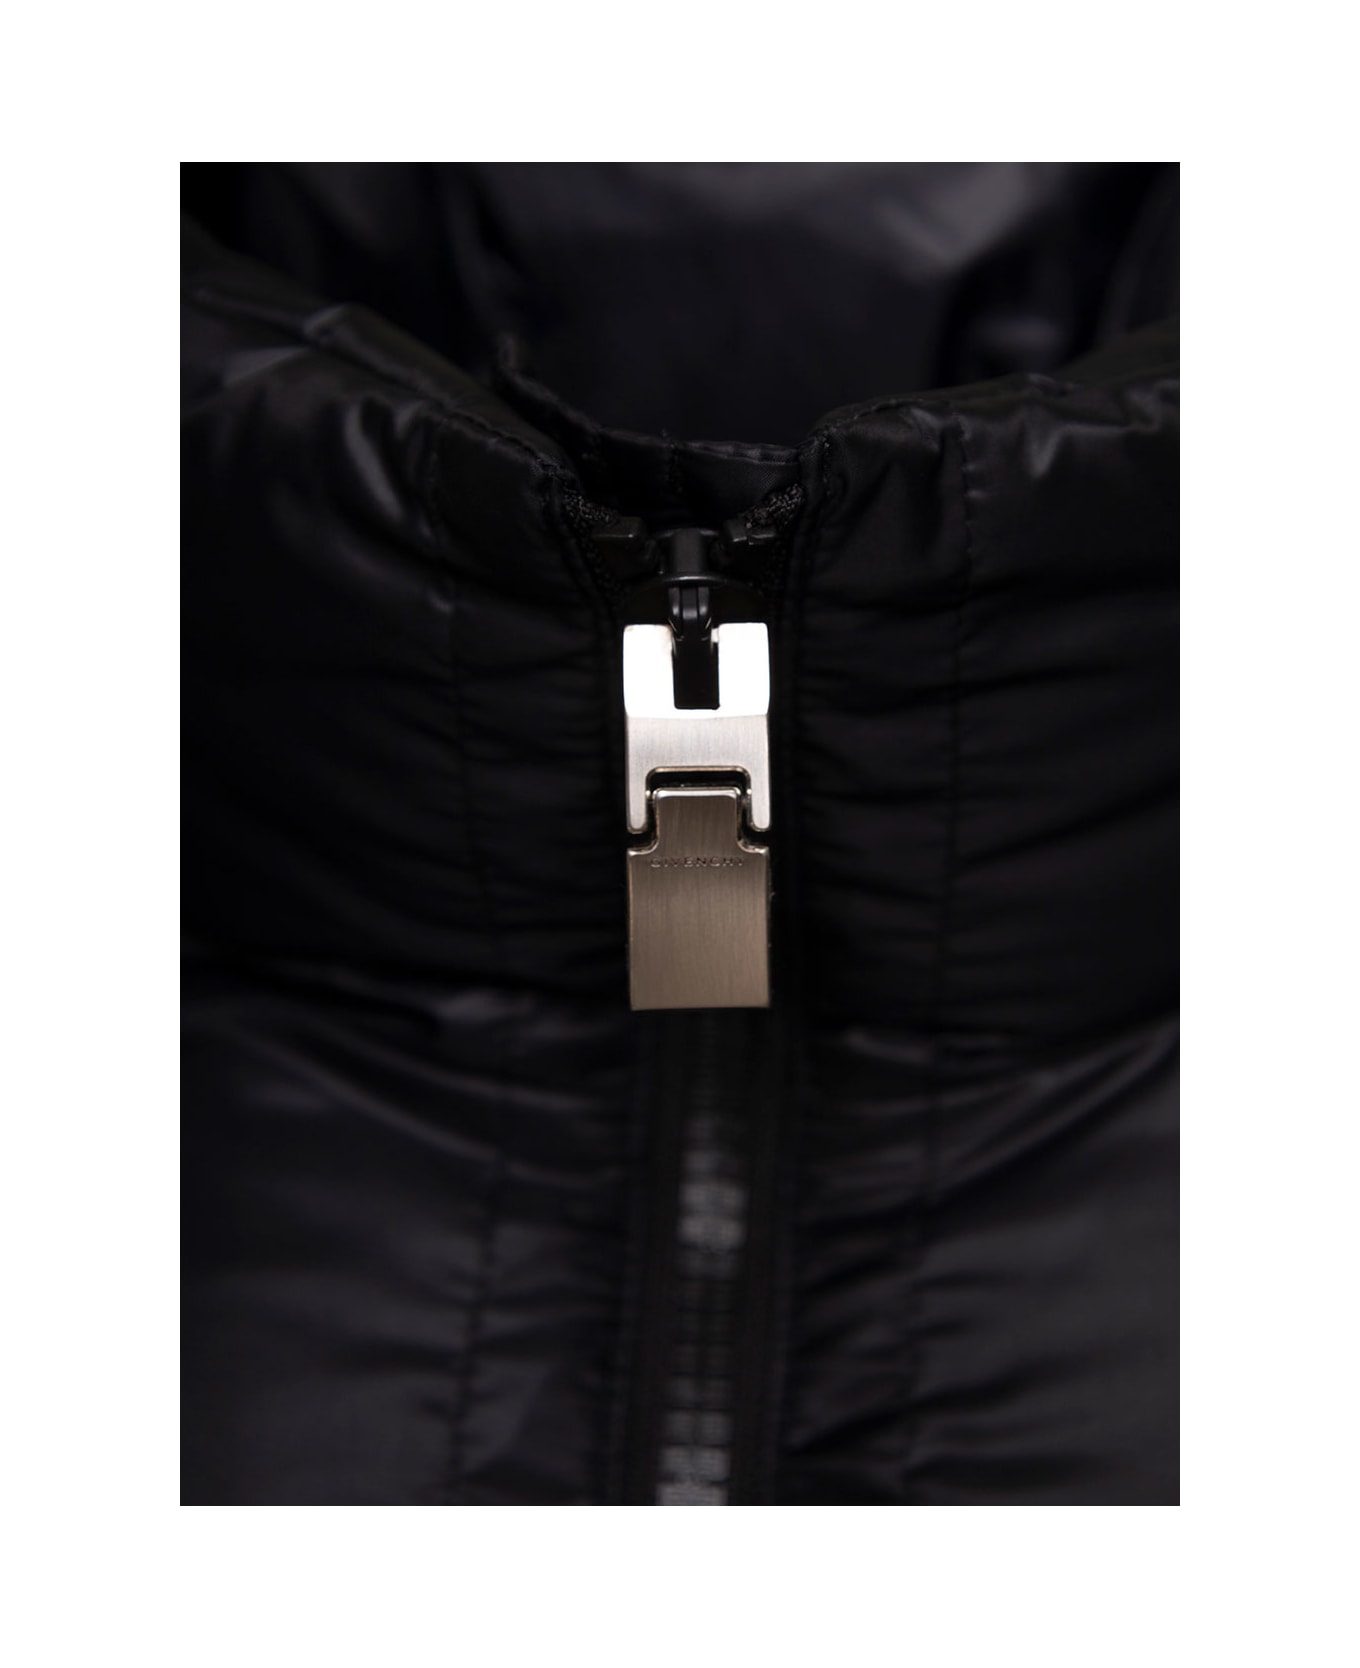 Givenchy Puffer Jacket With Logo On Back - Black